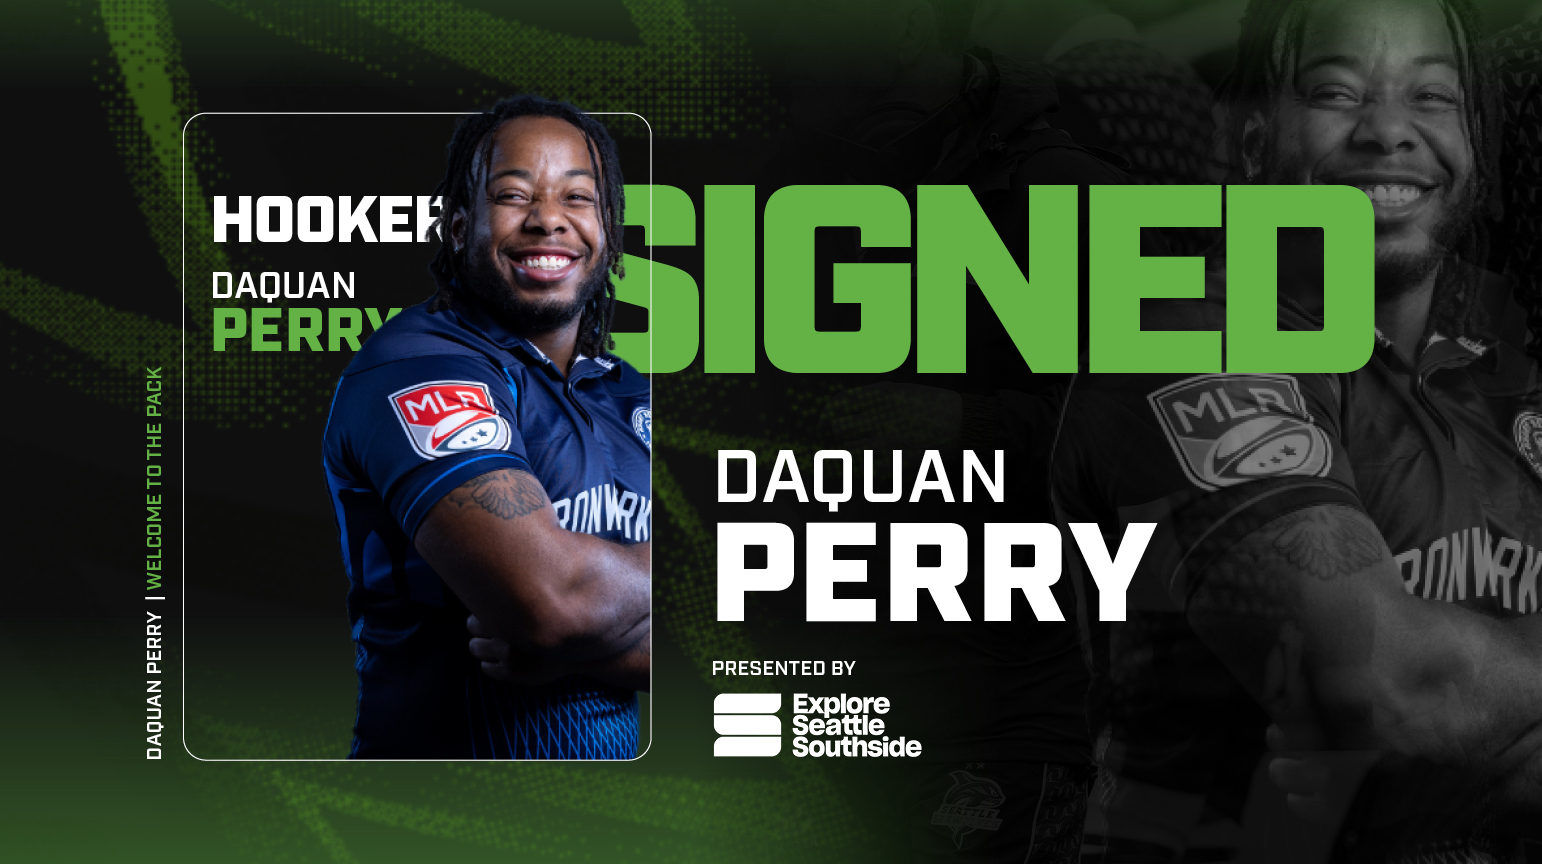 SEATTLE SEAWOLVES WELCOME POWERHOUSE DAQUAN PERRY